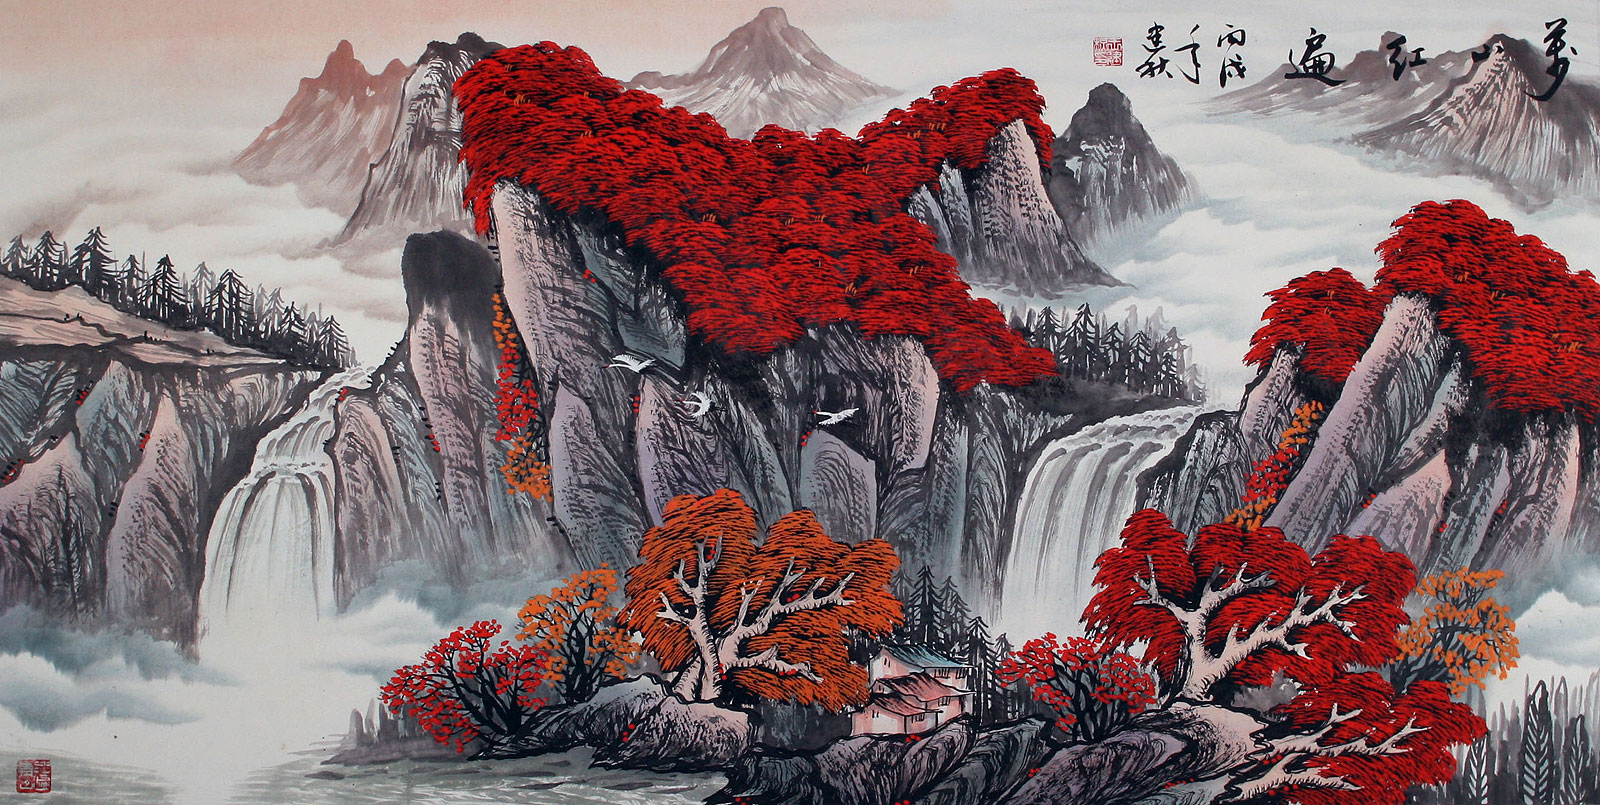 Red Leaves of Autumn - Asian Art Landscape - Chinese Artwork